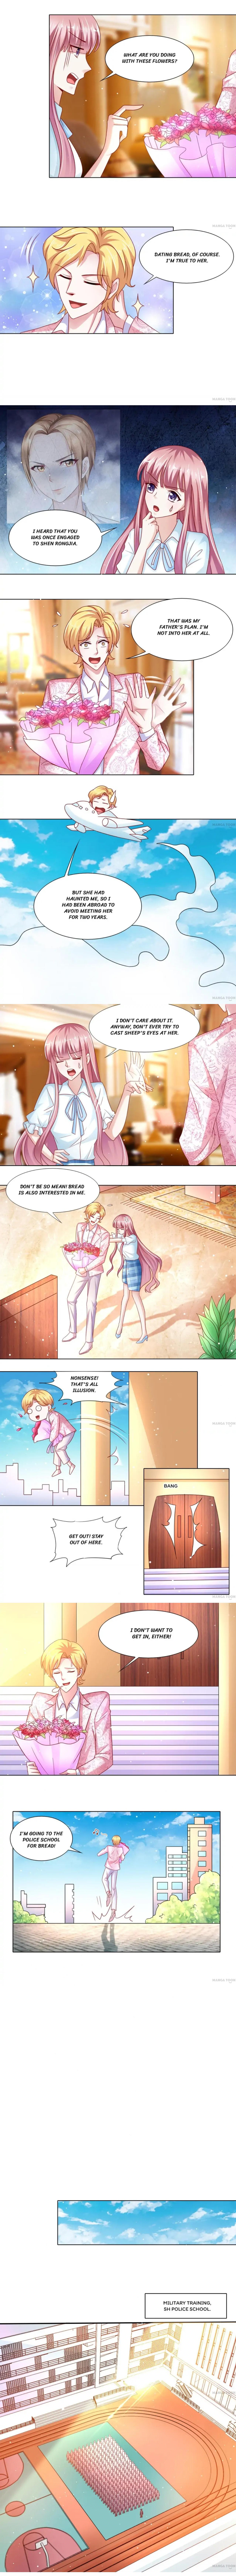 Vengeful Girl With Her Ceo - Page 2